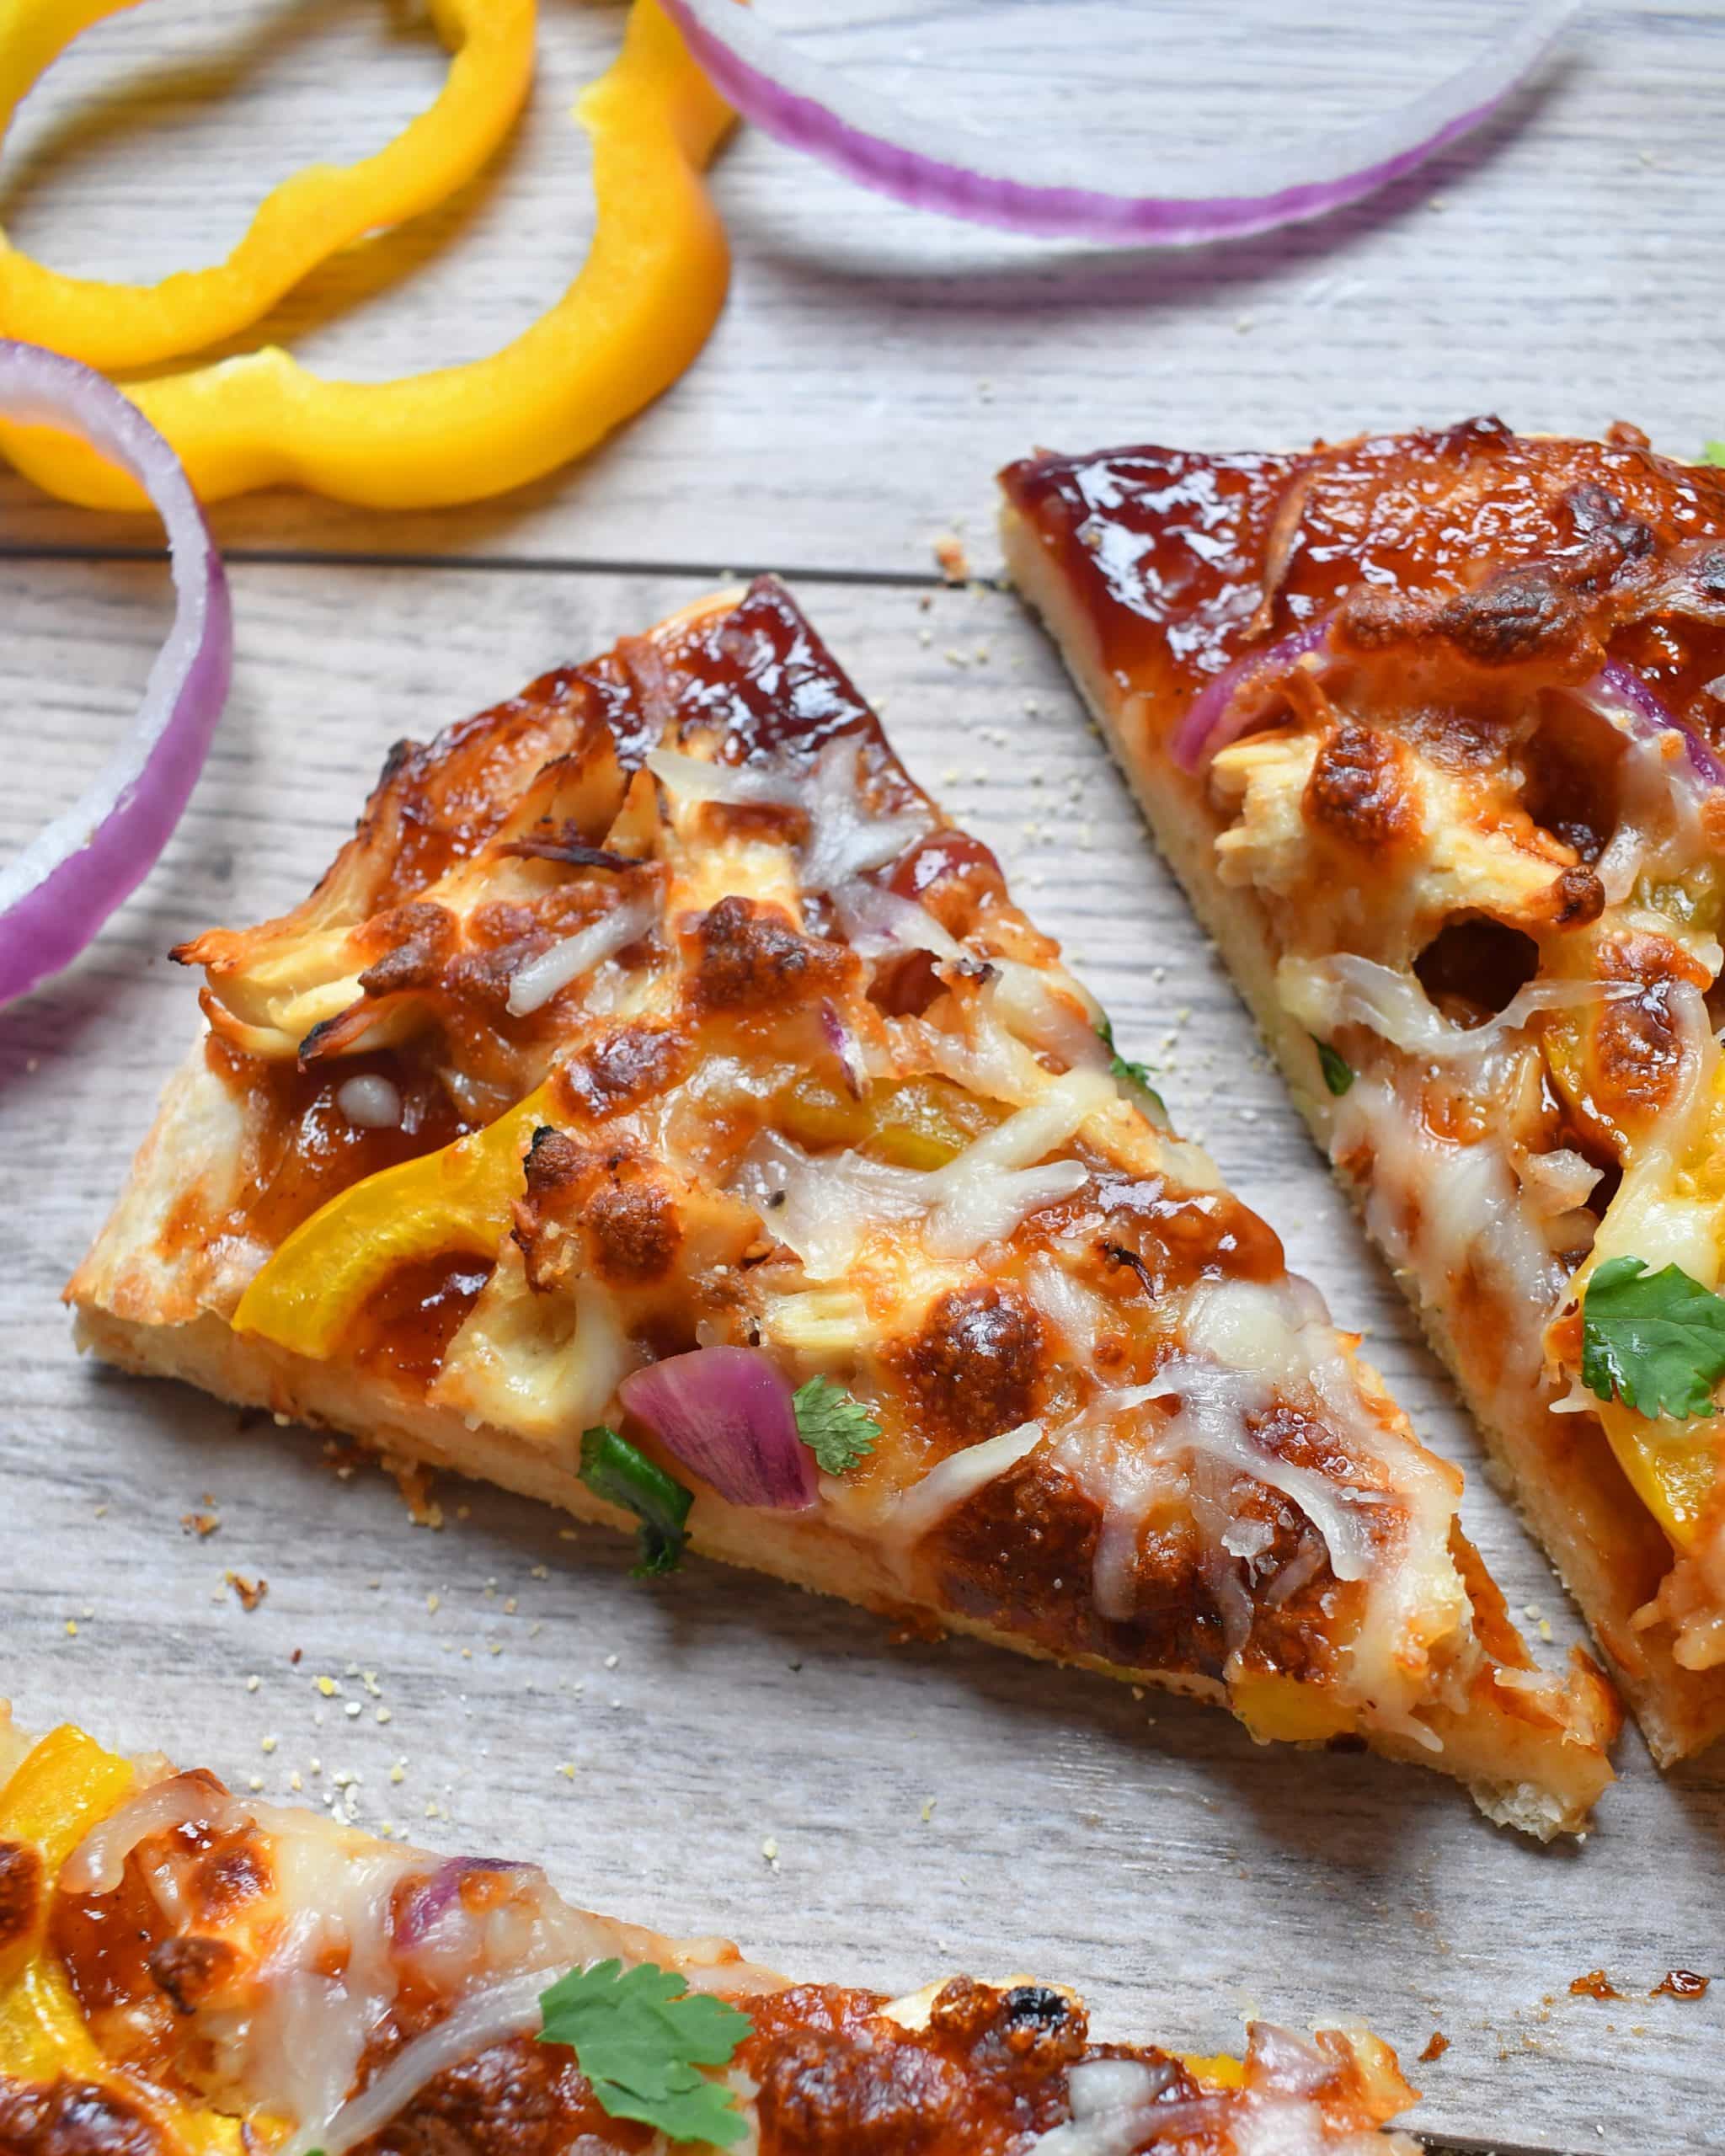 BBQ sauce, sweet peppers, red onions, chicken all a top homemade pizza crust for a BBQ chicken pizza that will have you coming back for more.